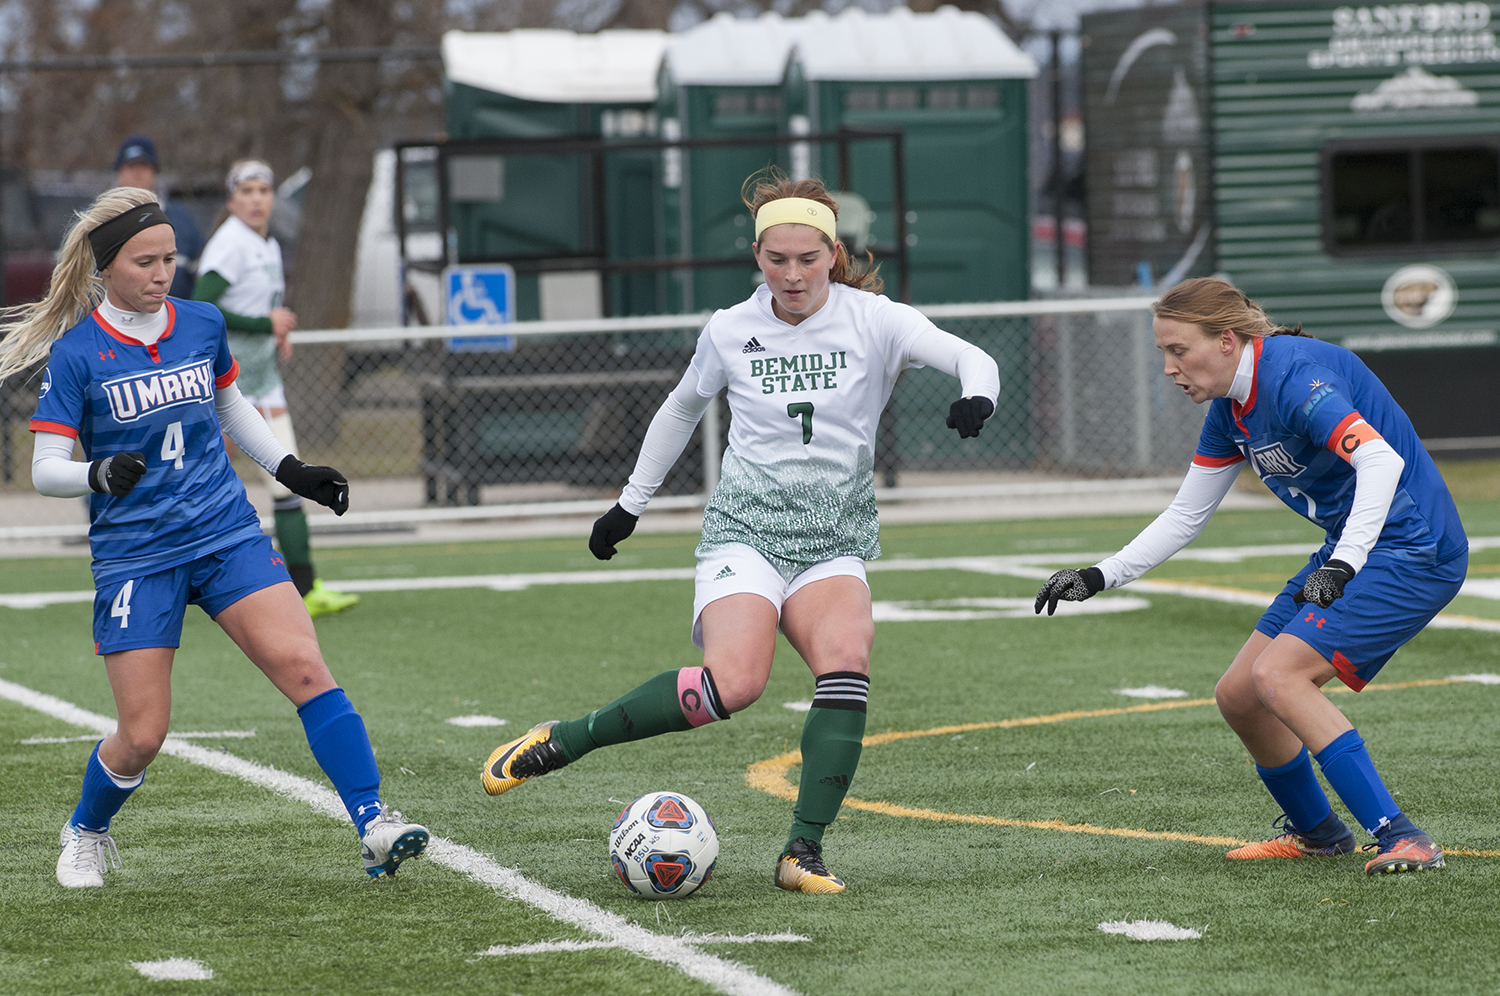 BSU’s women’s soccer program, under the direction of head coach Jim Stone, assembled an undefeated 2018 regular season (17-0-1 overall, 14-0-1 Northern Sun Intercollegiate Conference) and won an NCAA Tournament game for the first time in its history.